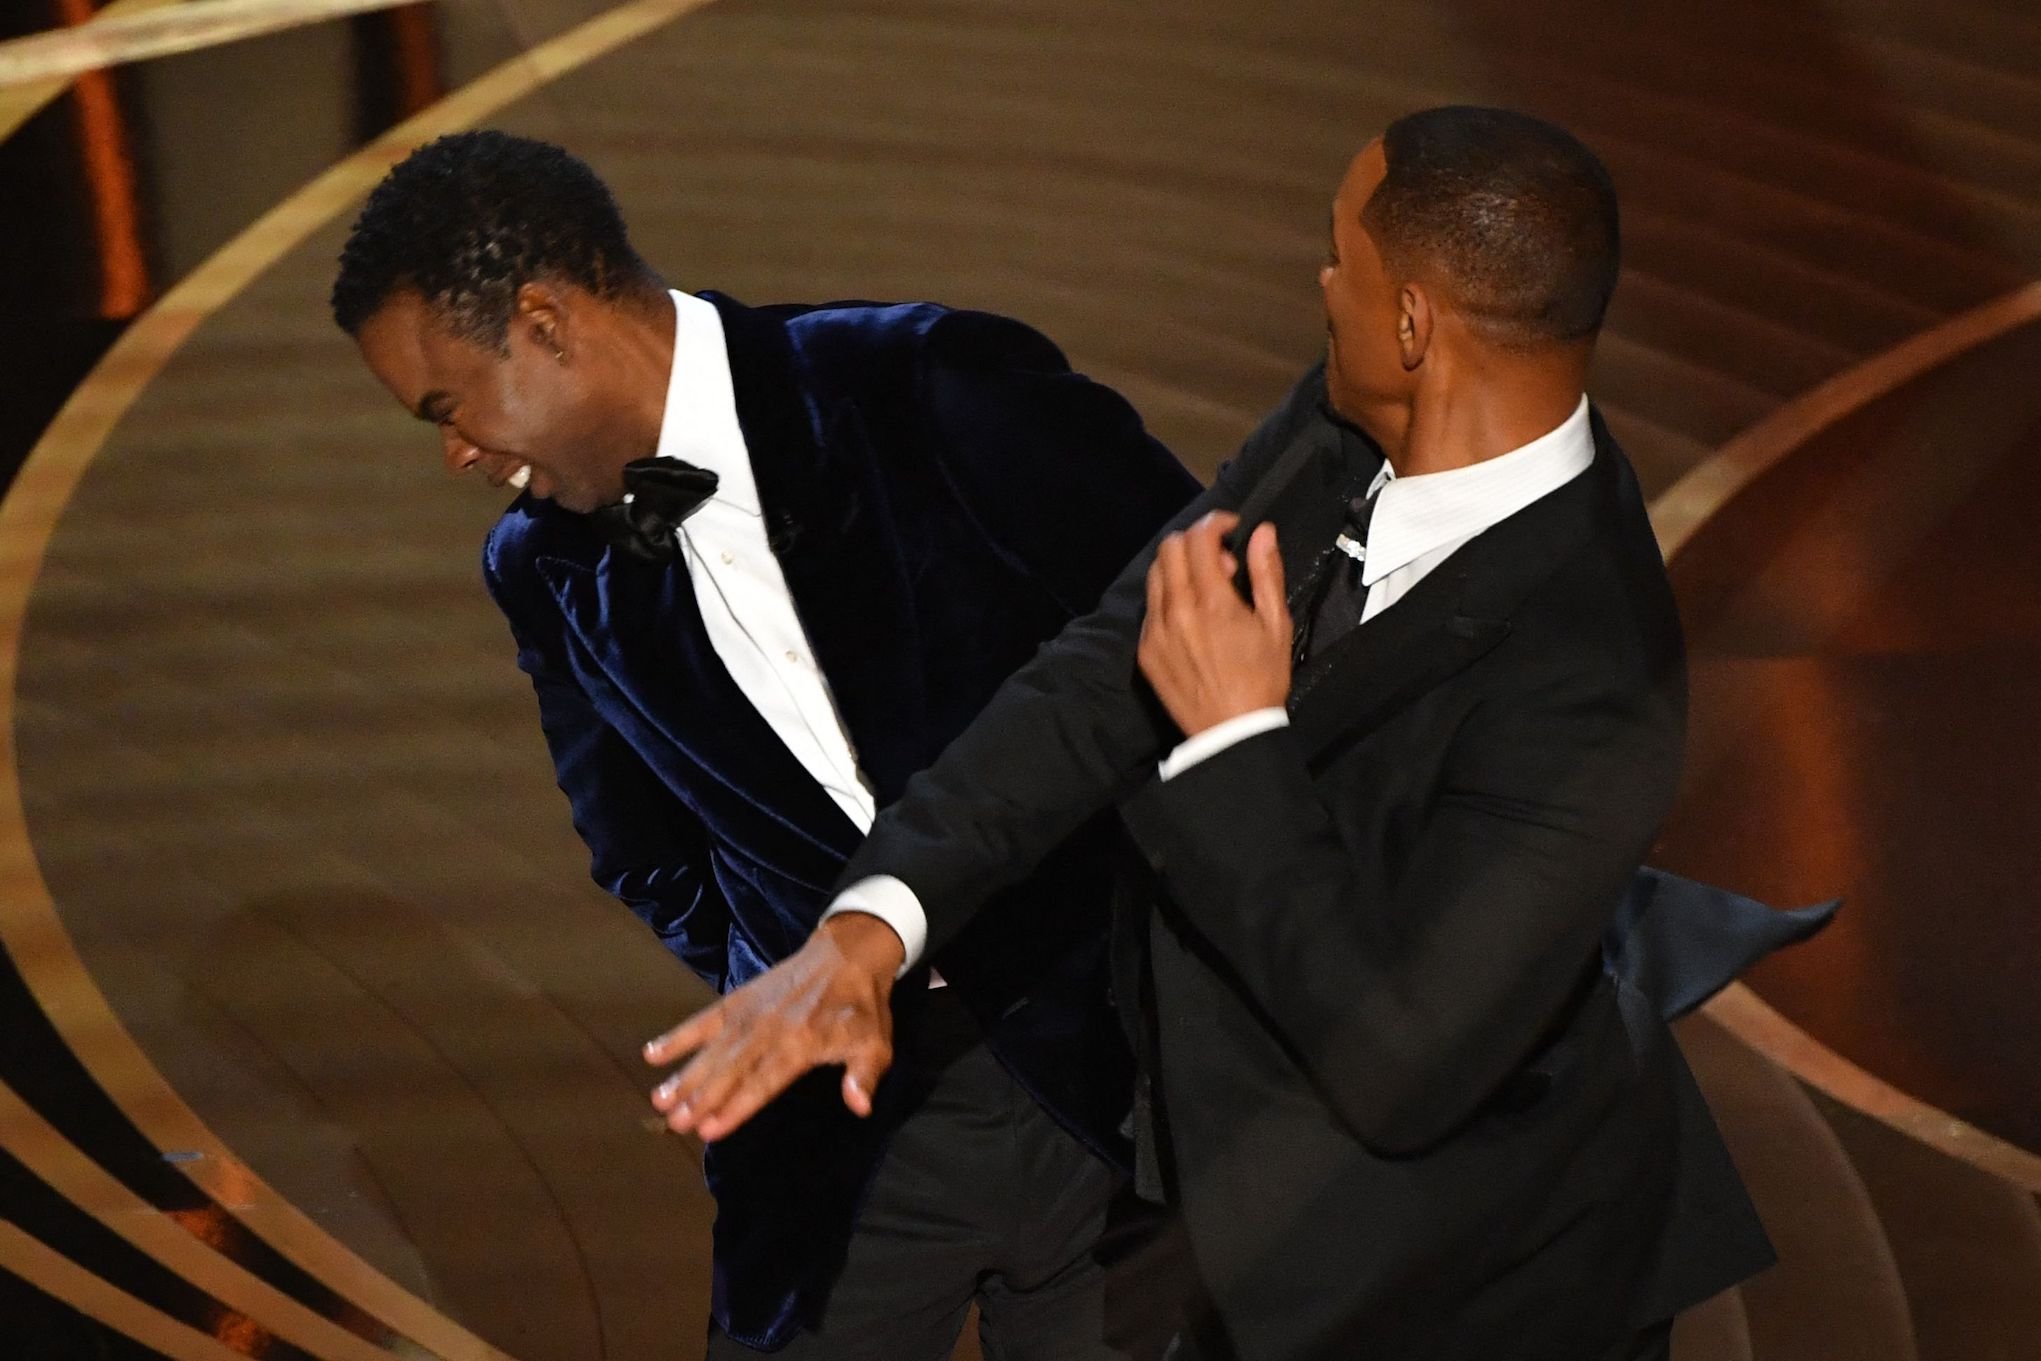 Will Smith slaps Chris Rock at the Oscars 2022 on stage